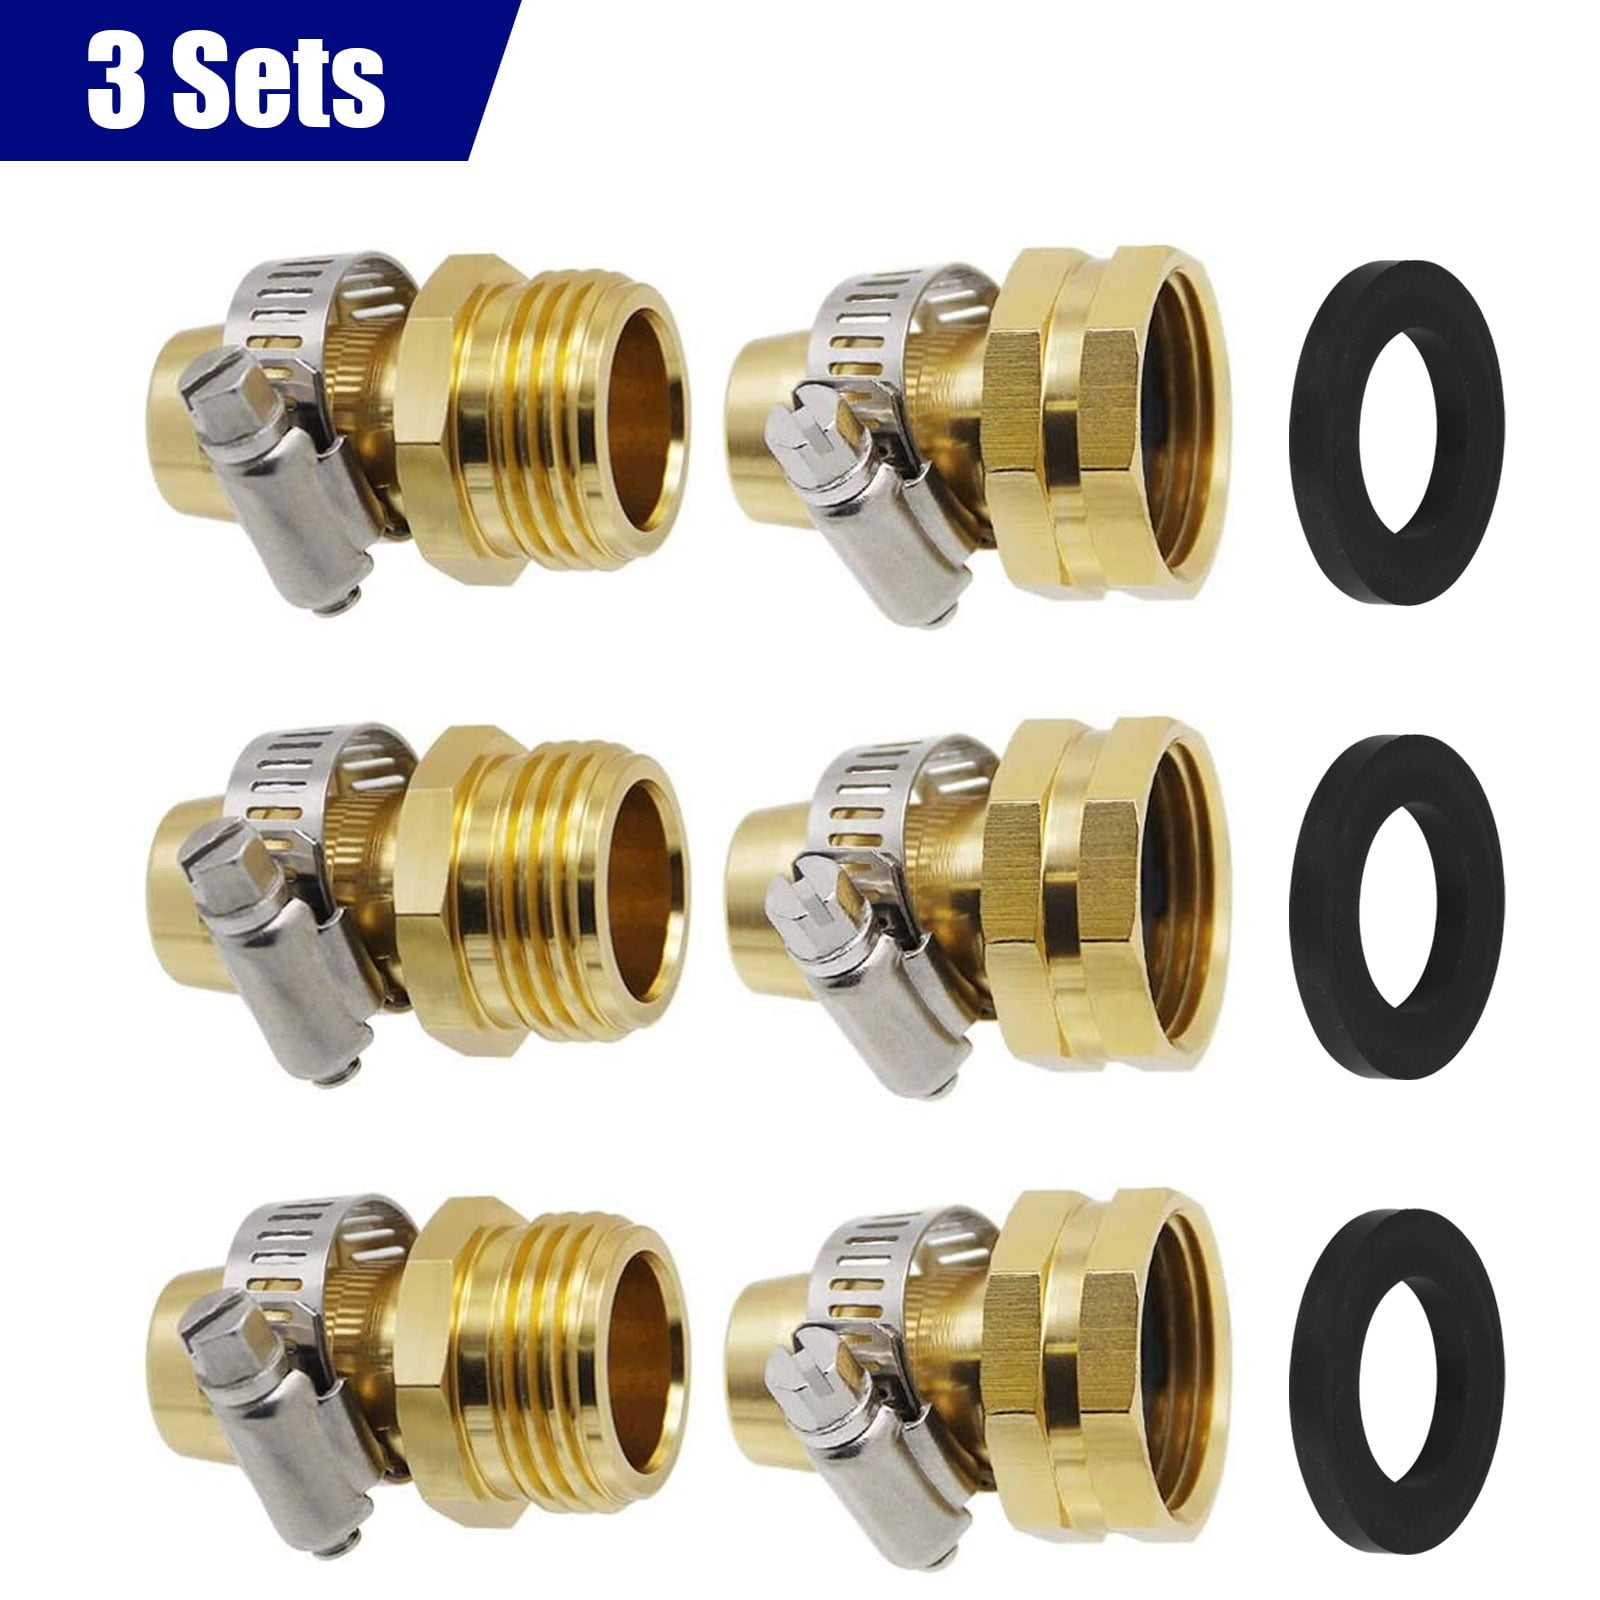 3/4 Inch Garden Hose Fitting Quick Repair Connector Male and Female Set 3 Set 